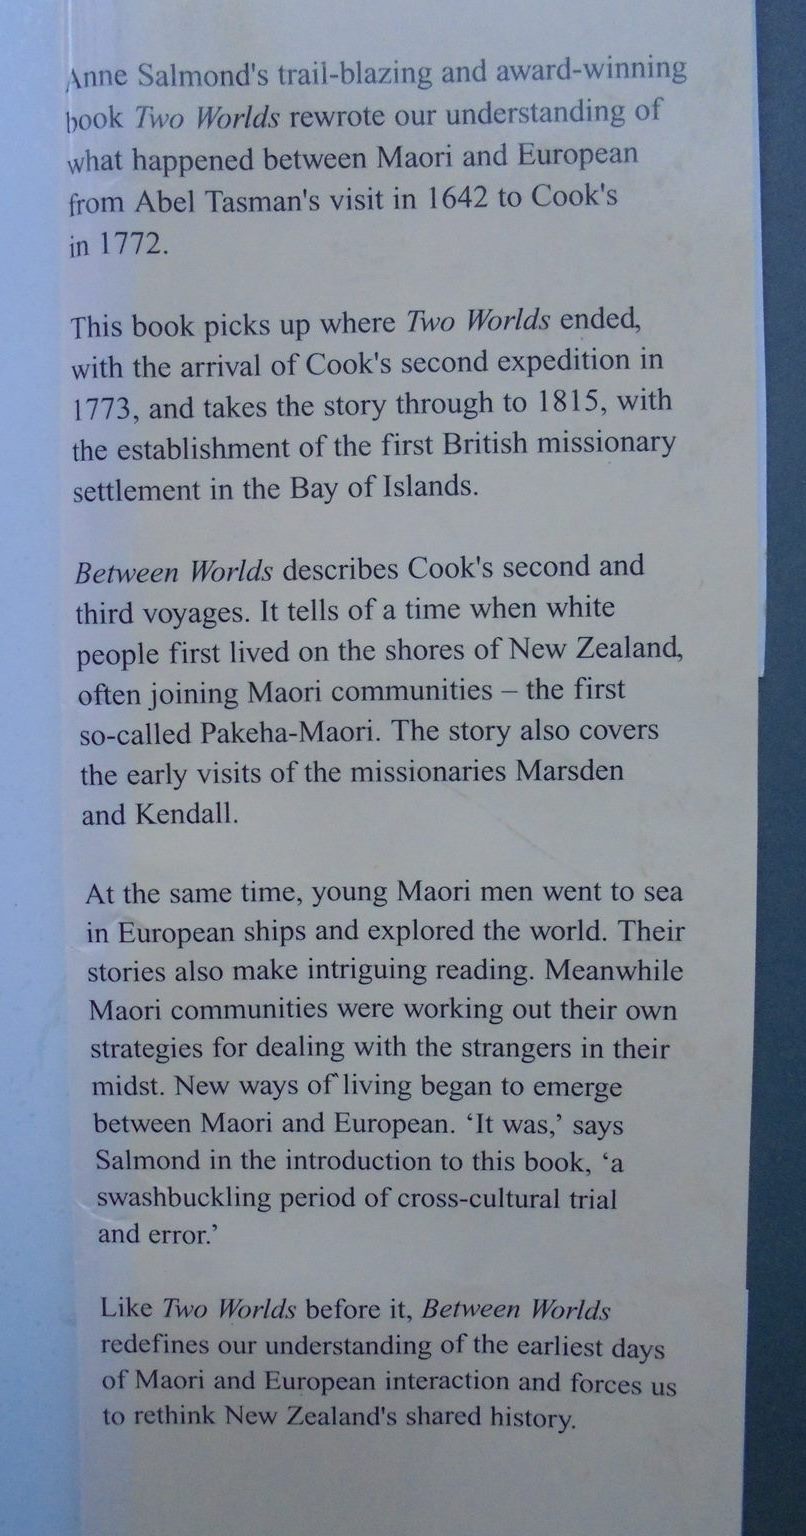 Between Worlds: Early Exchanges Between Maori and Europeans, 1773-1815 - by Anne Salmond. [First Edition]